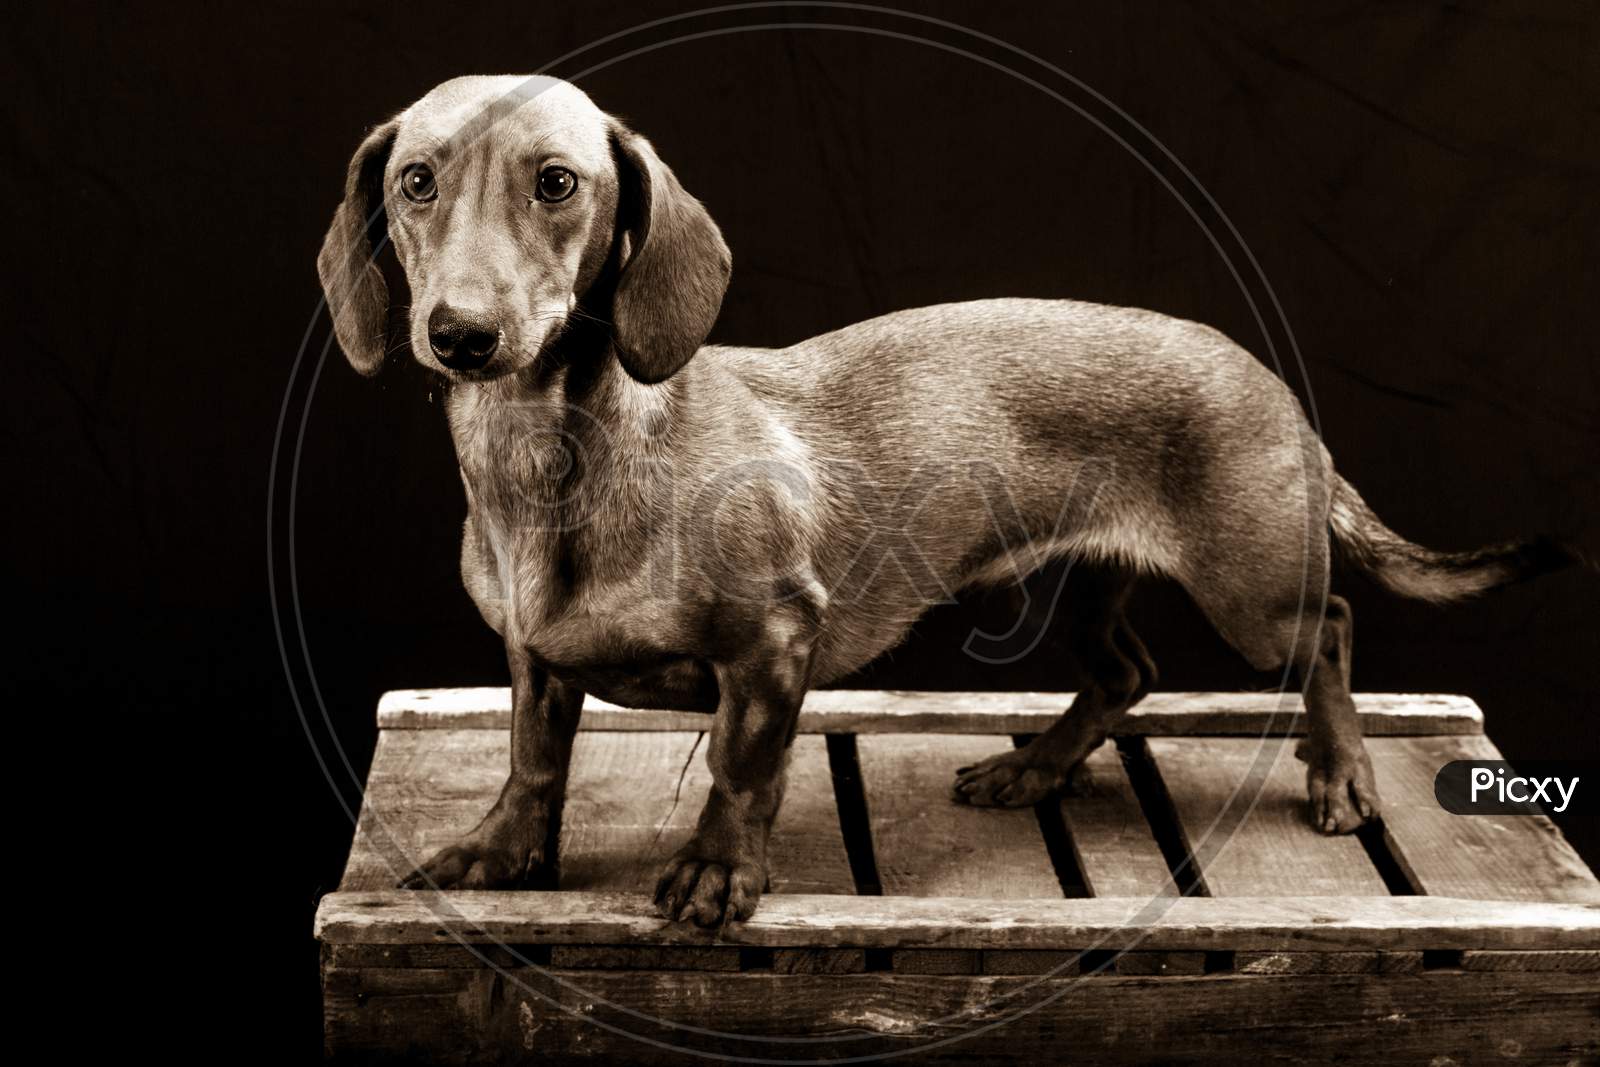 Black And White Image Of A Dachshund On A Wooden Box In A Photo Studio